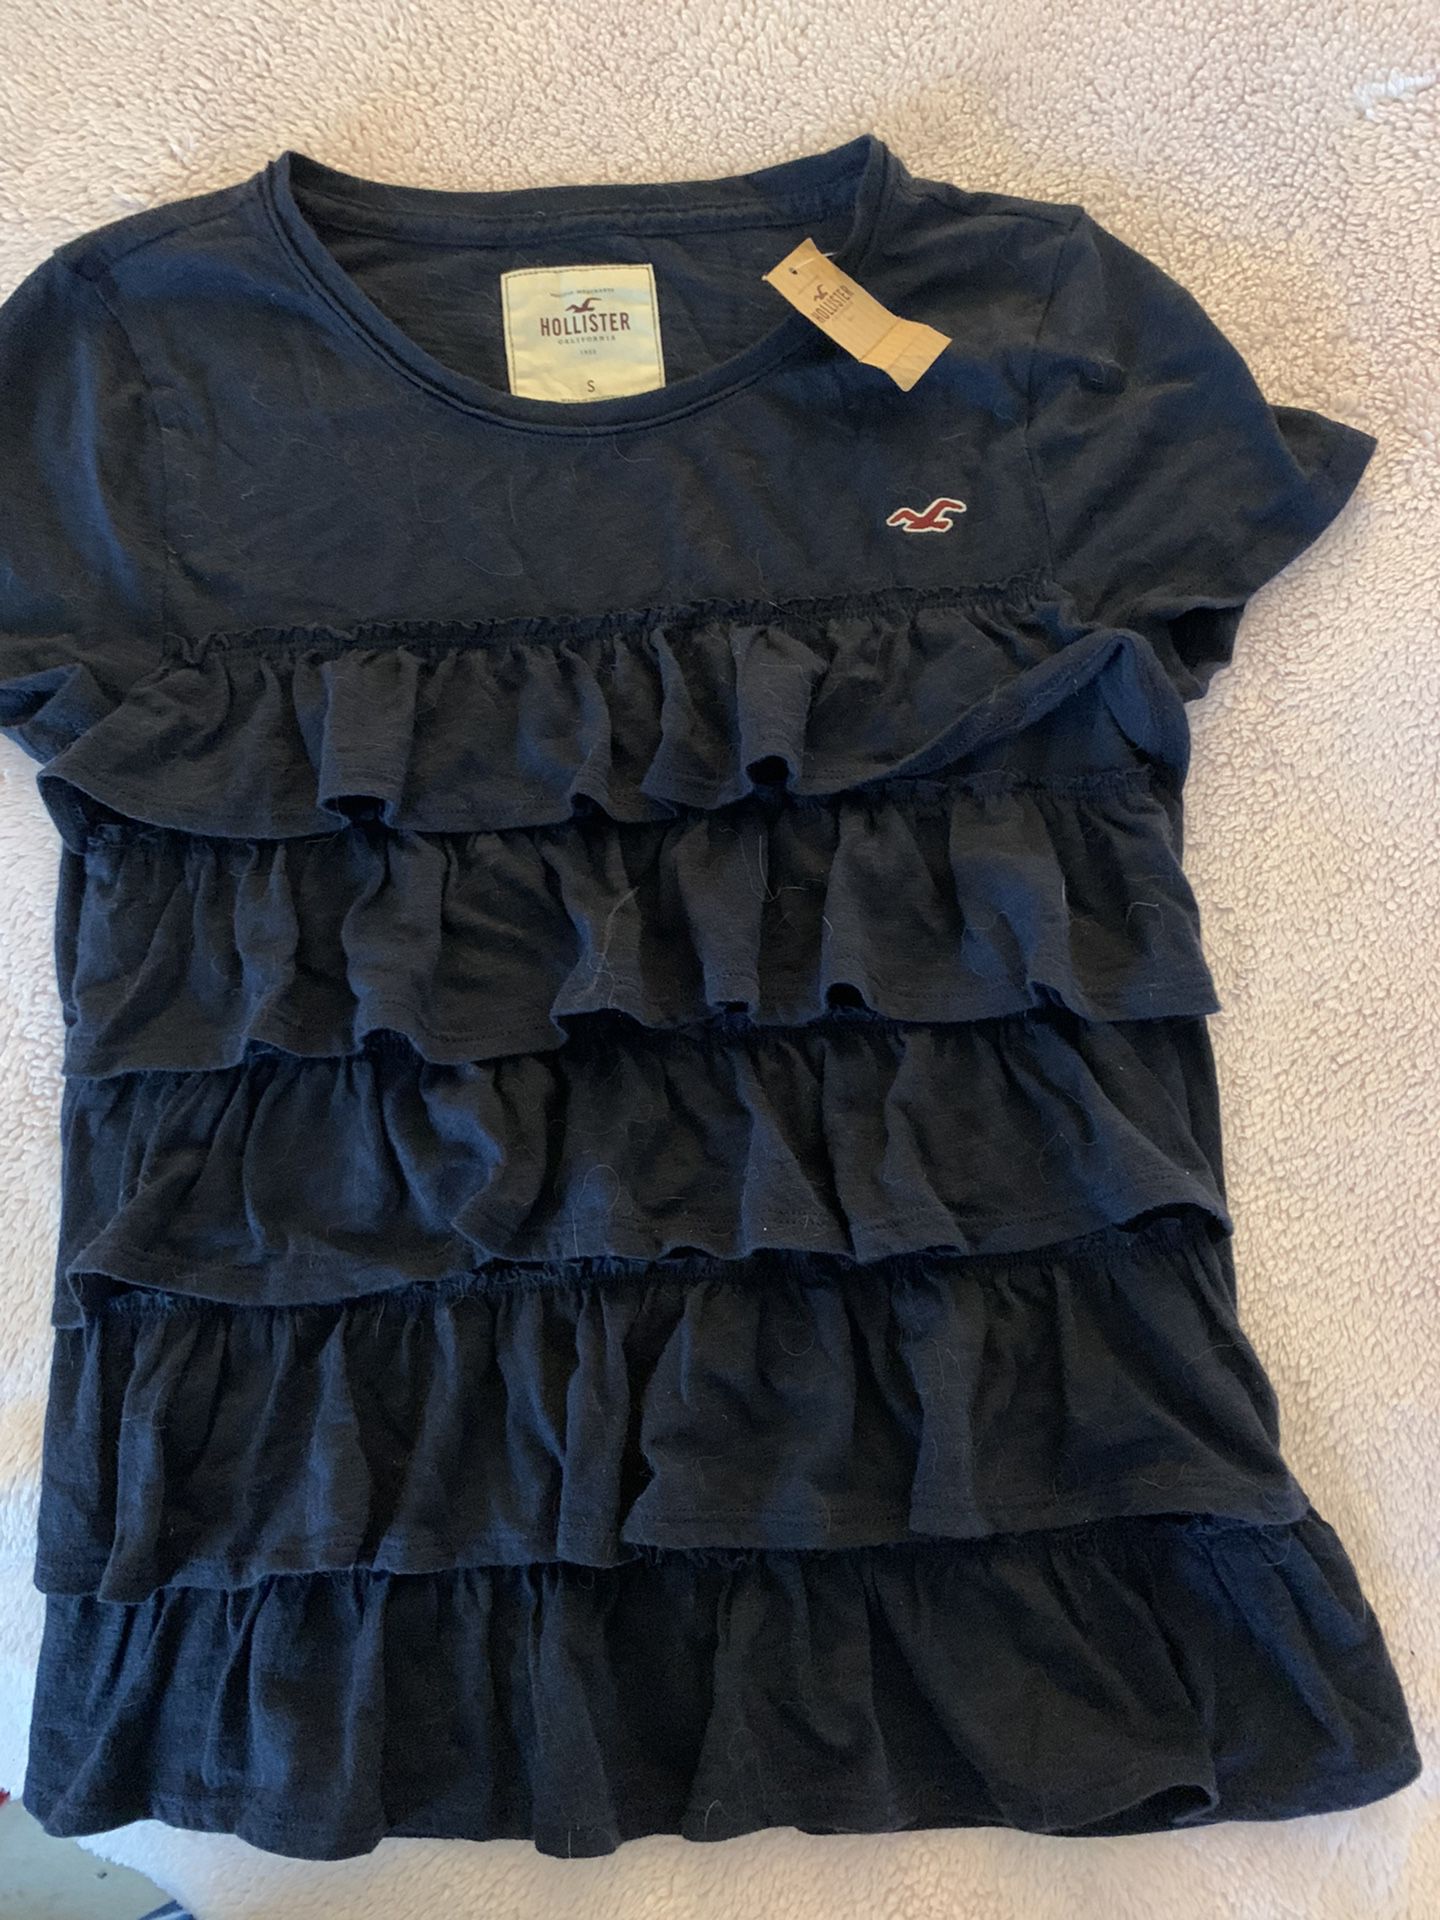 New lady small dark blue Hollister short sleeve with delicate ruffles in the front